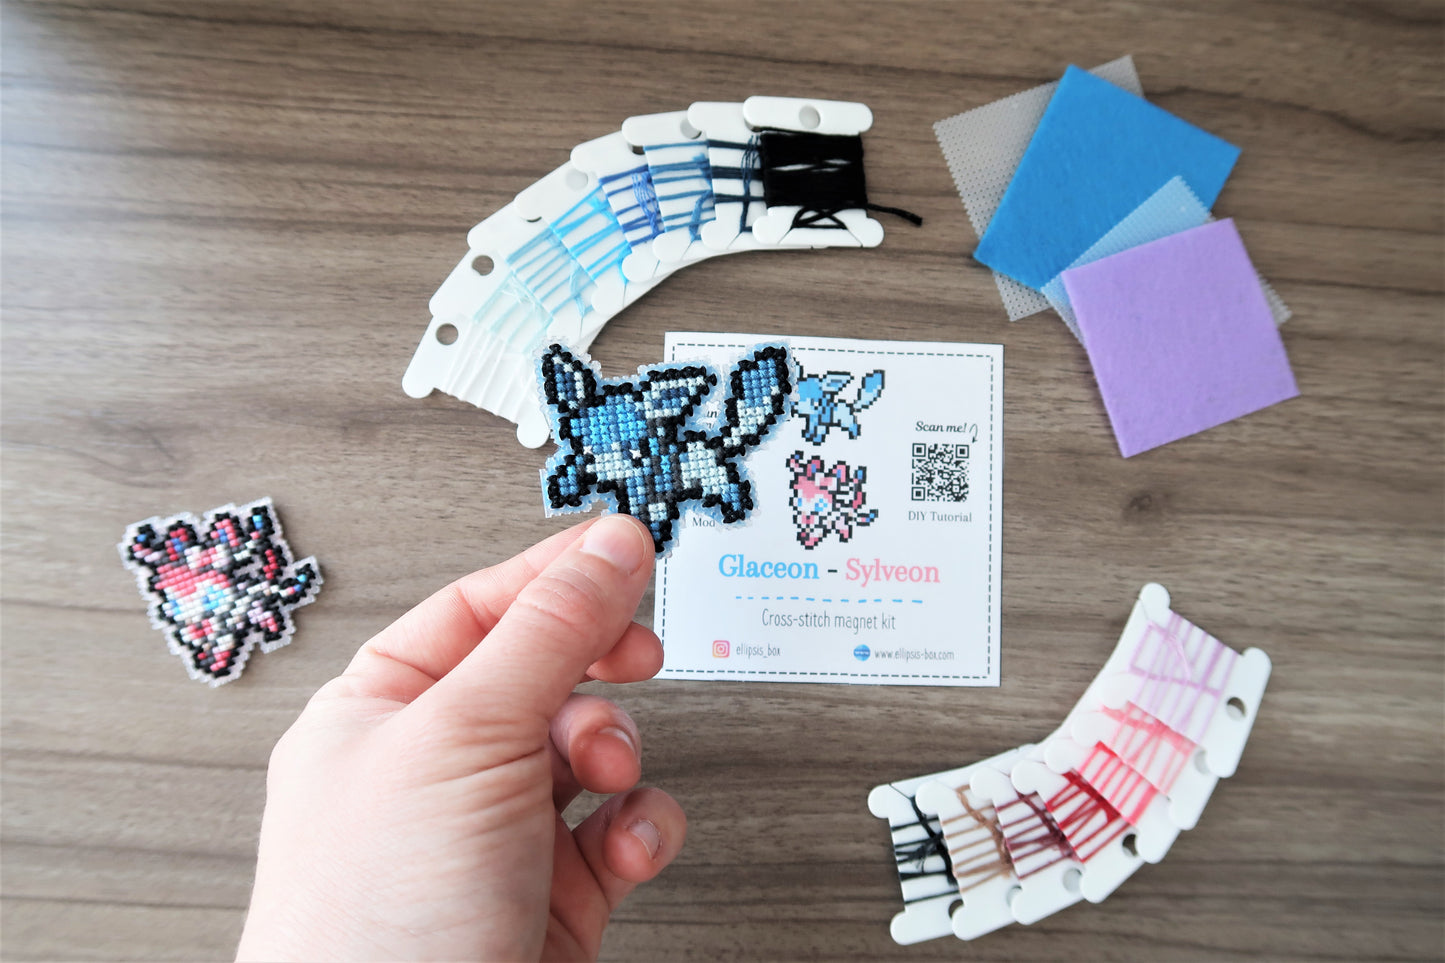 Glaceon and Sylveon from Pokemon - Cross stitch magnet kit